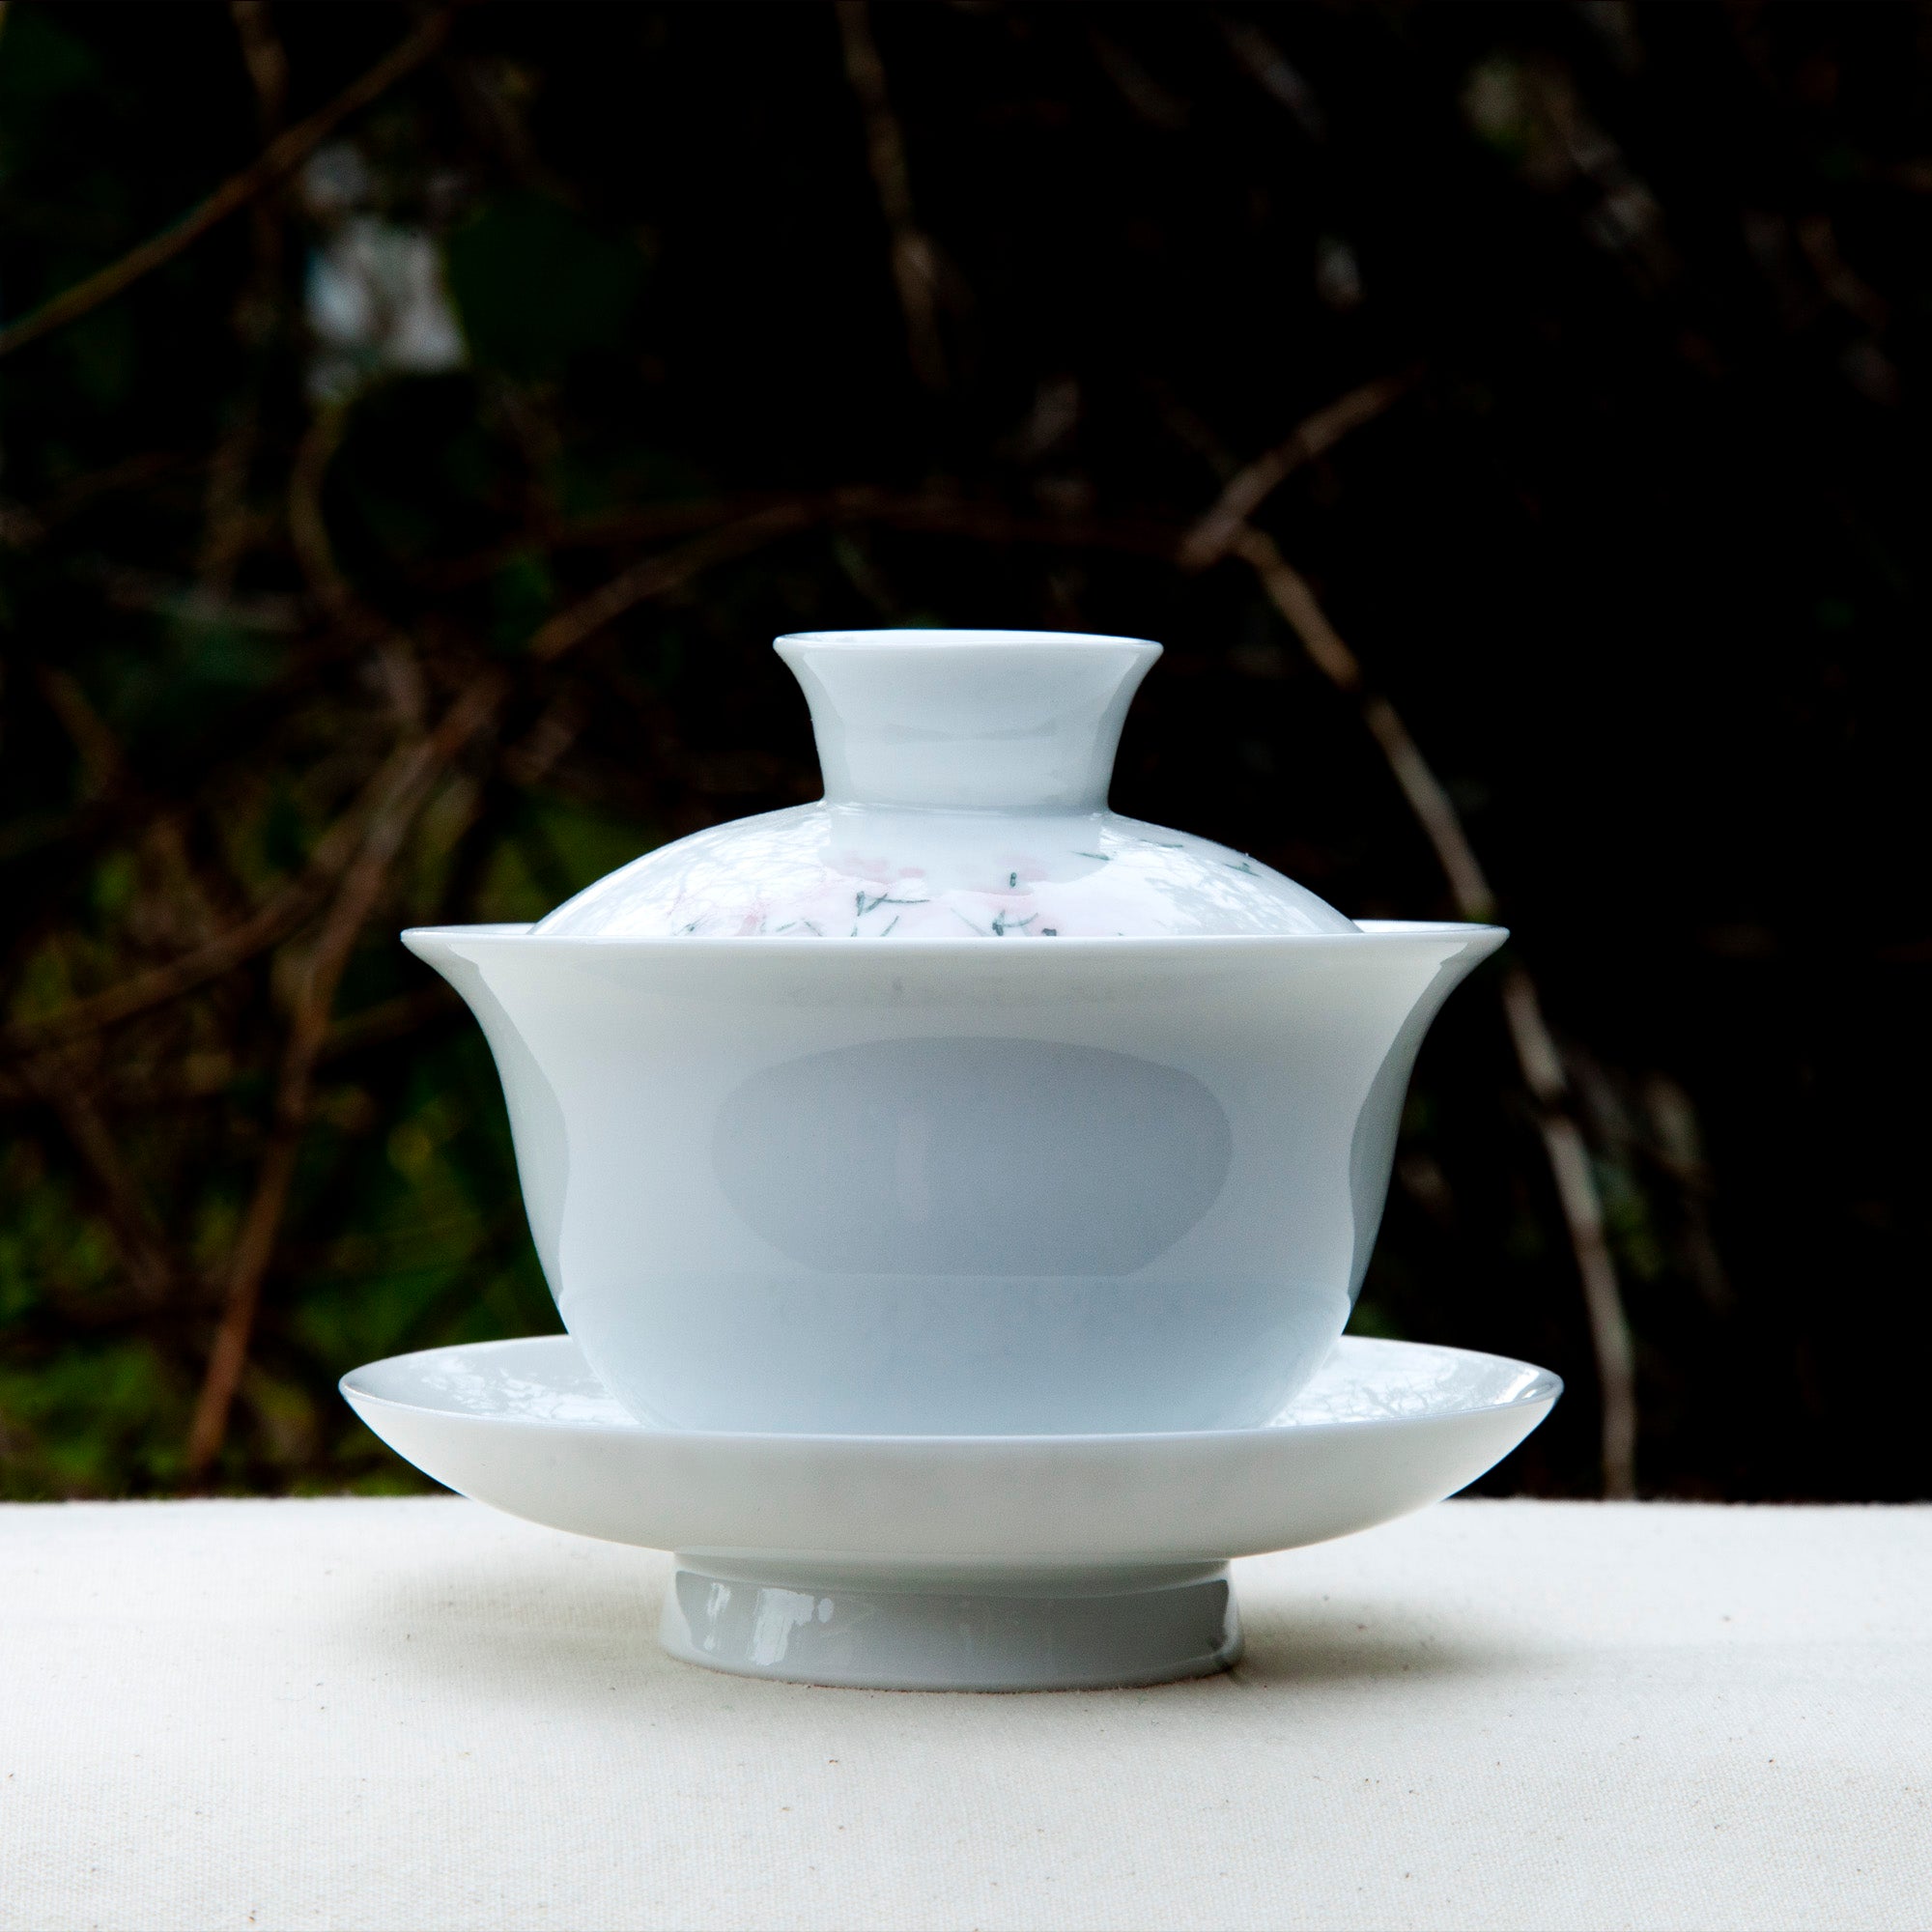 Hand-made Porcelain Gaiwan with Peach flowers